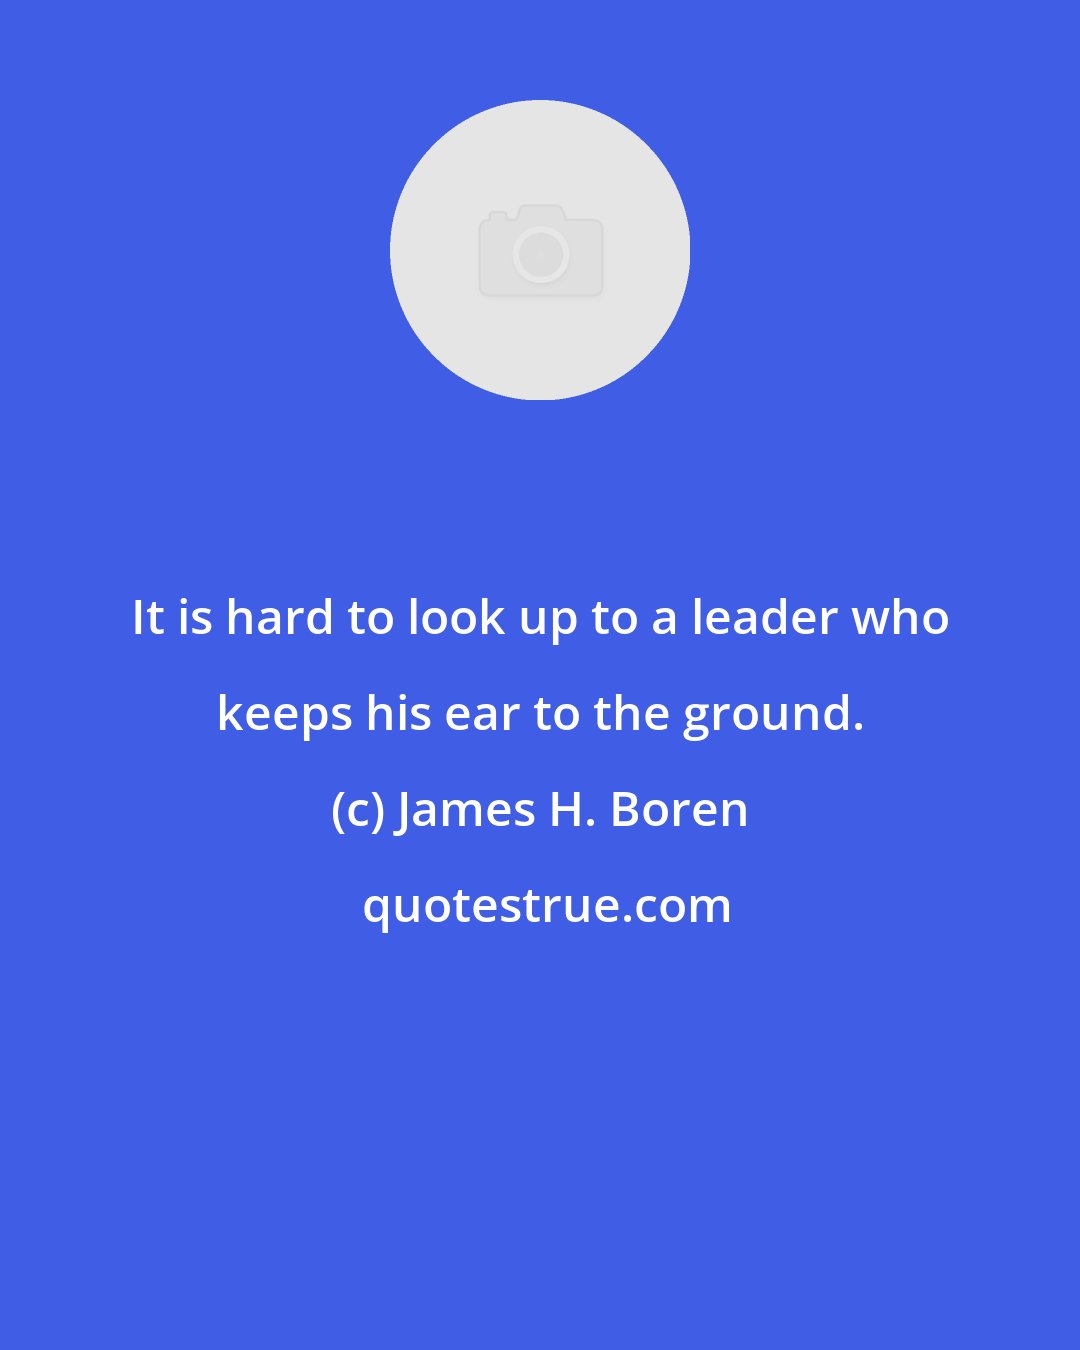 James H. Boren: It is hard to look up to a leader who keeps his ear to the ground.